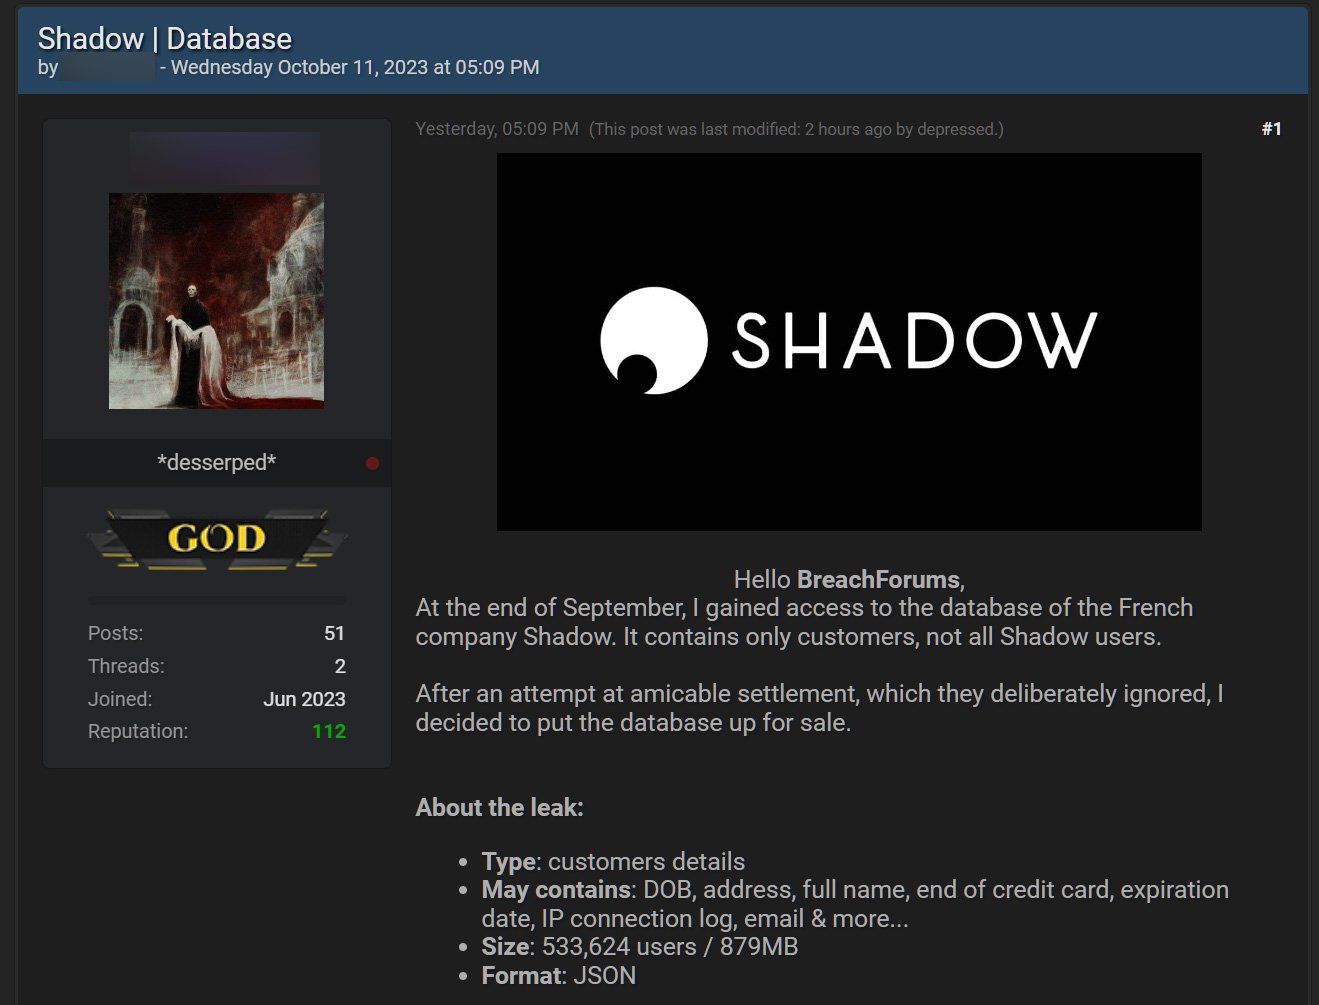 Threat actor claiming to sell stolen Shadow database